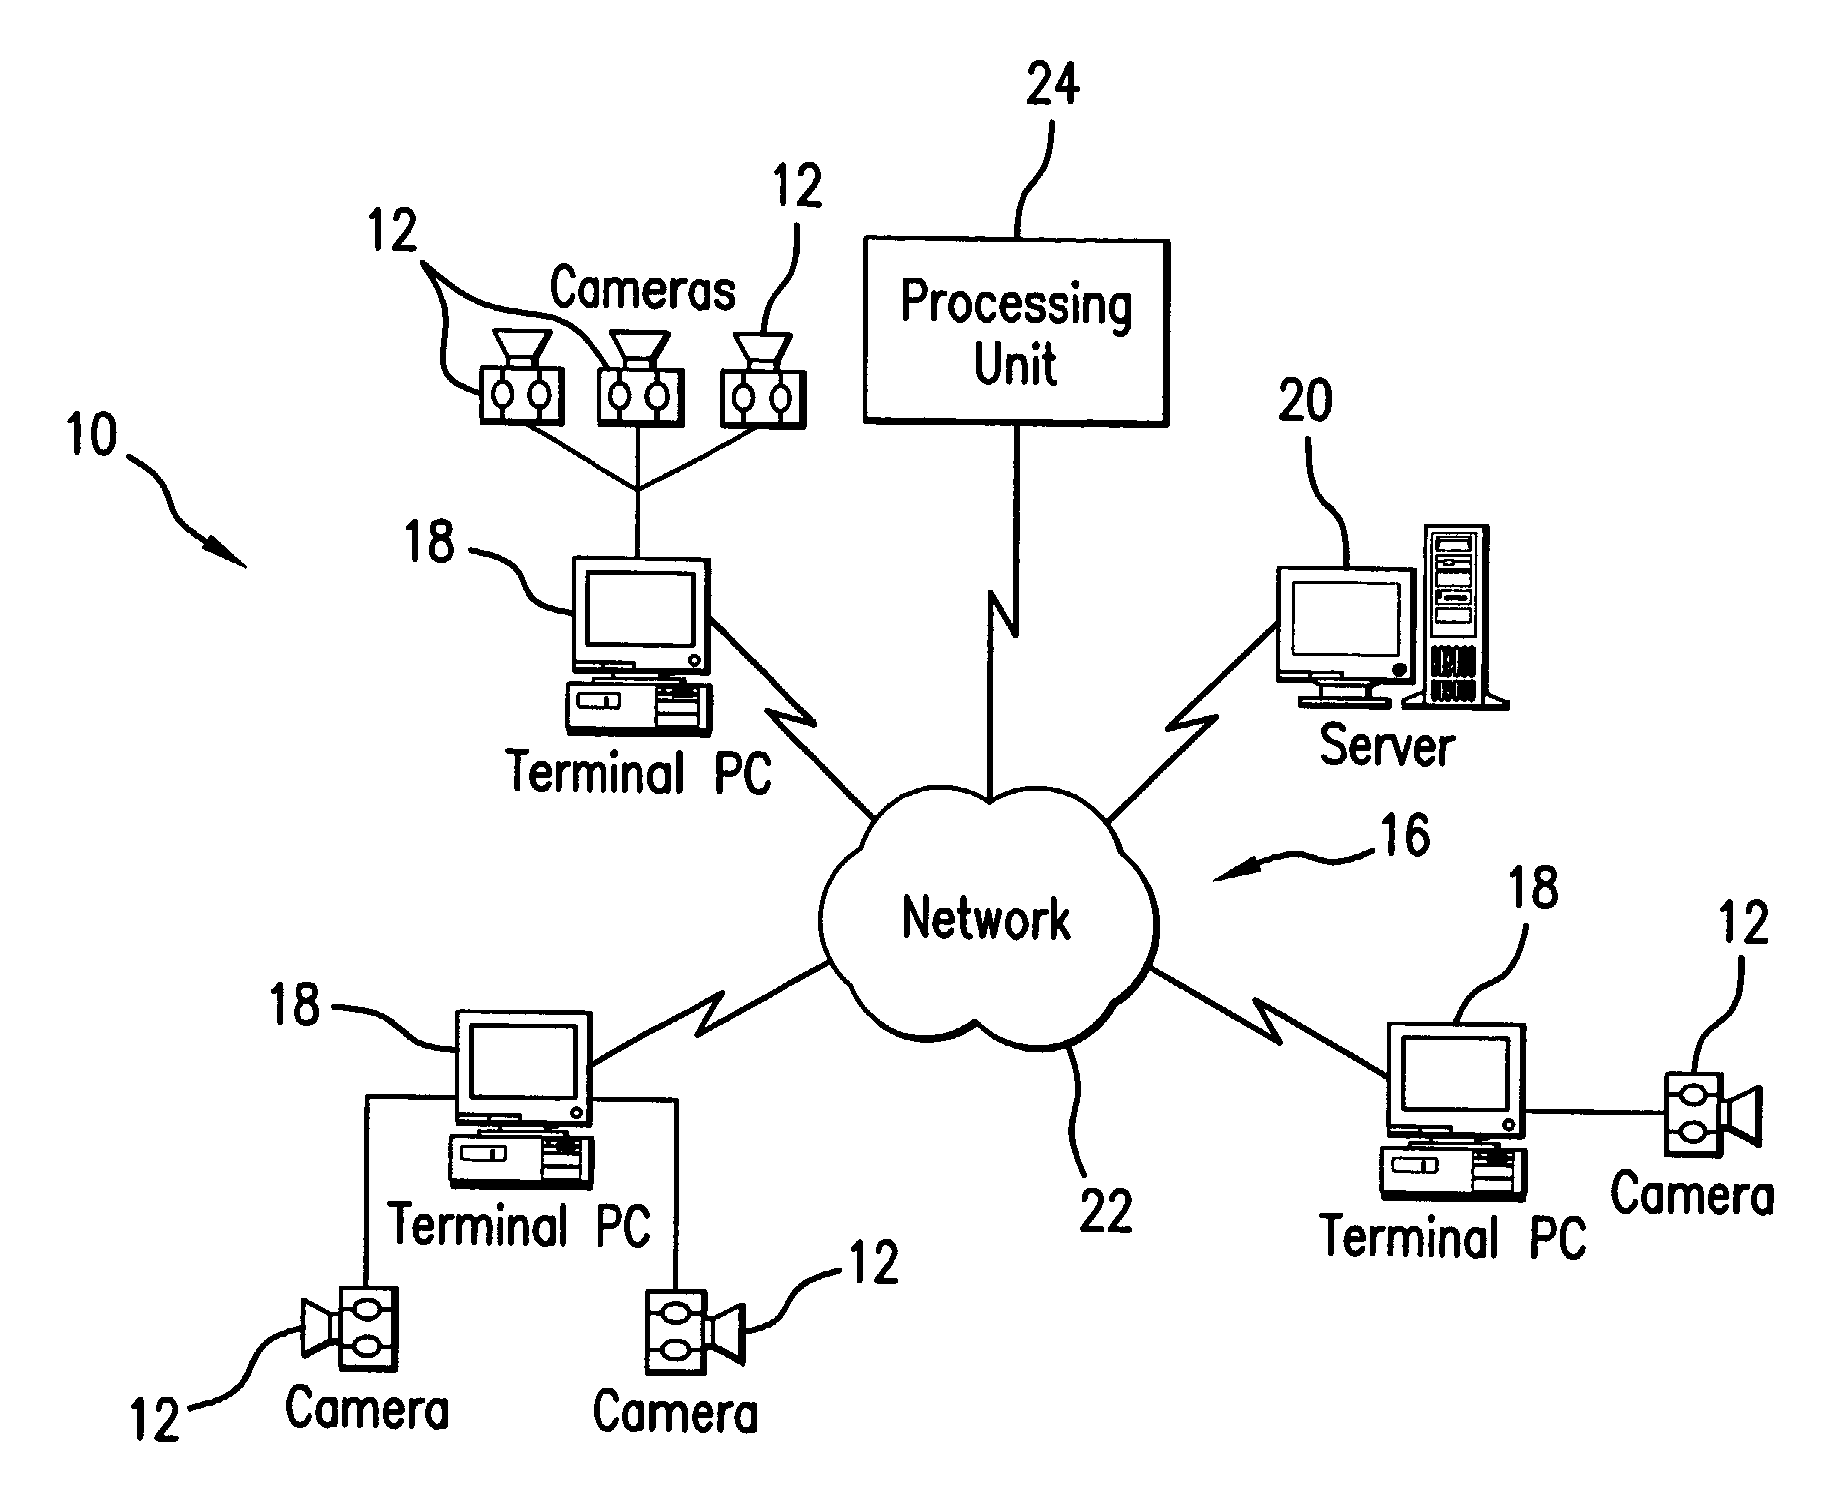 Method and System for Object Surveillance and Real Time Activity Recognition